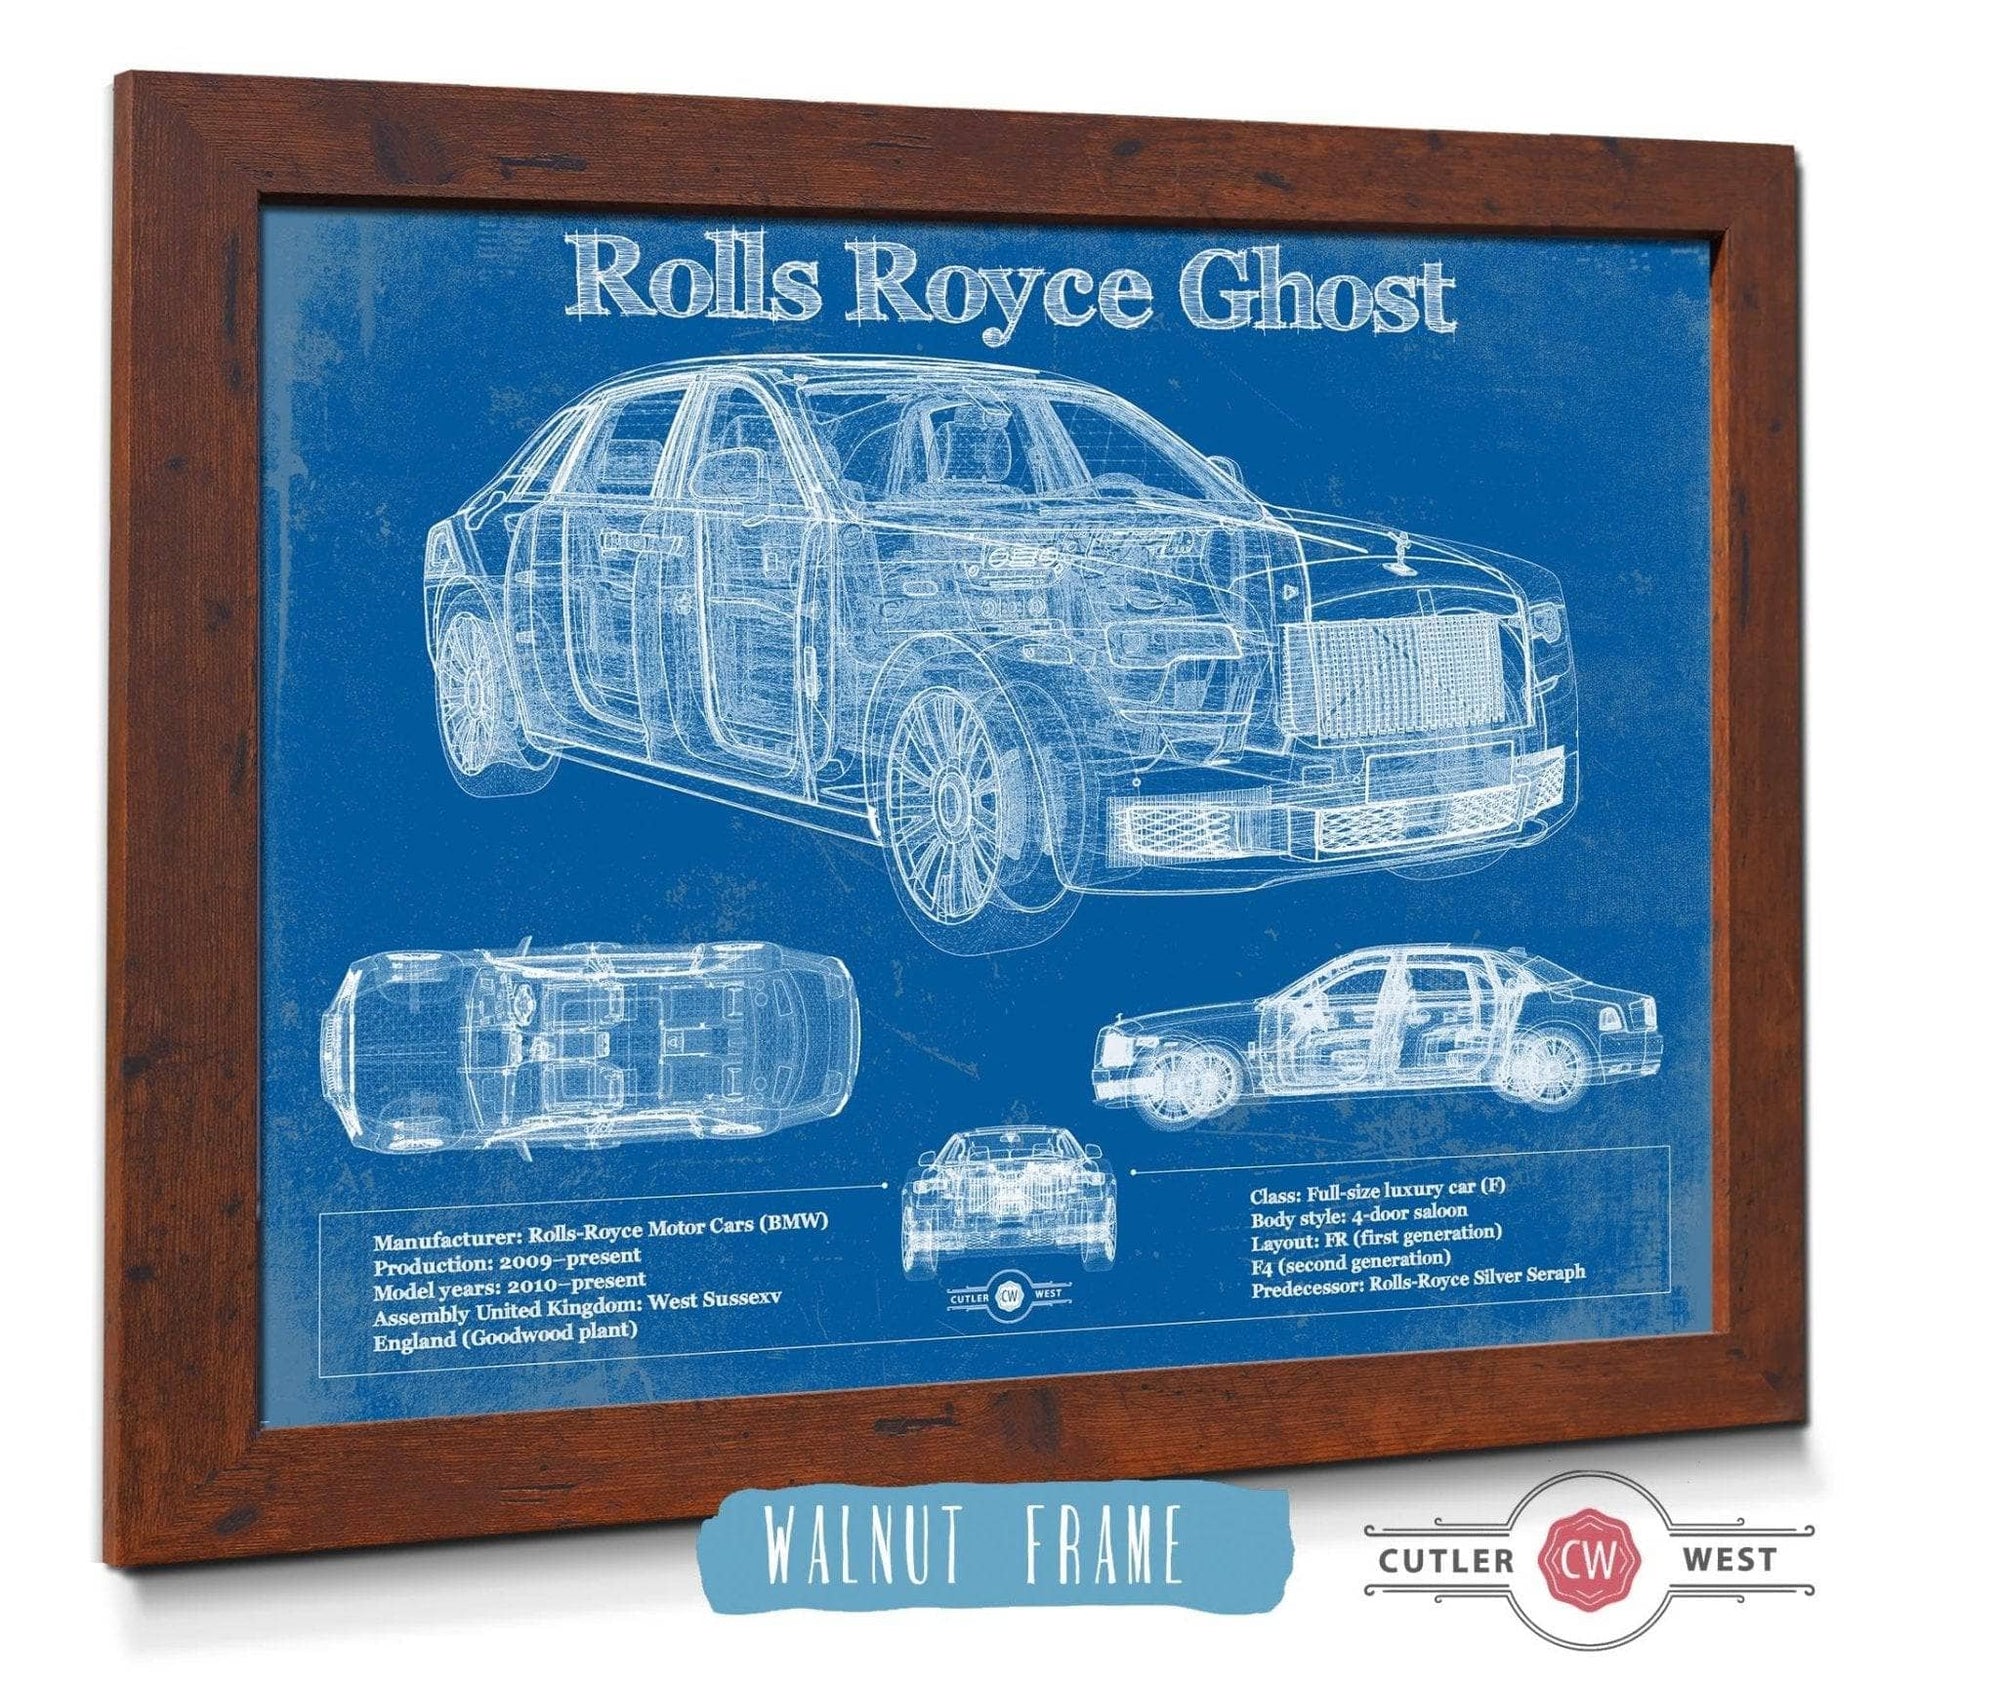 Cutler West Vehicle Collection Rolls Royce Ghost 2018 Vintage Blueprint Auto Print